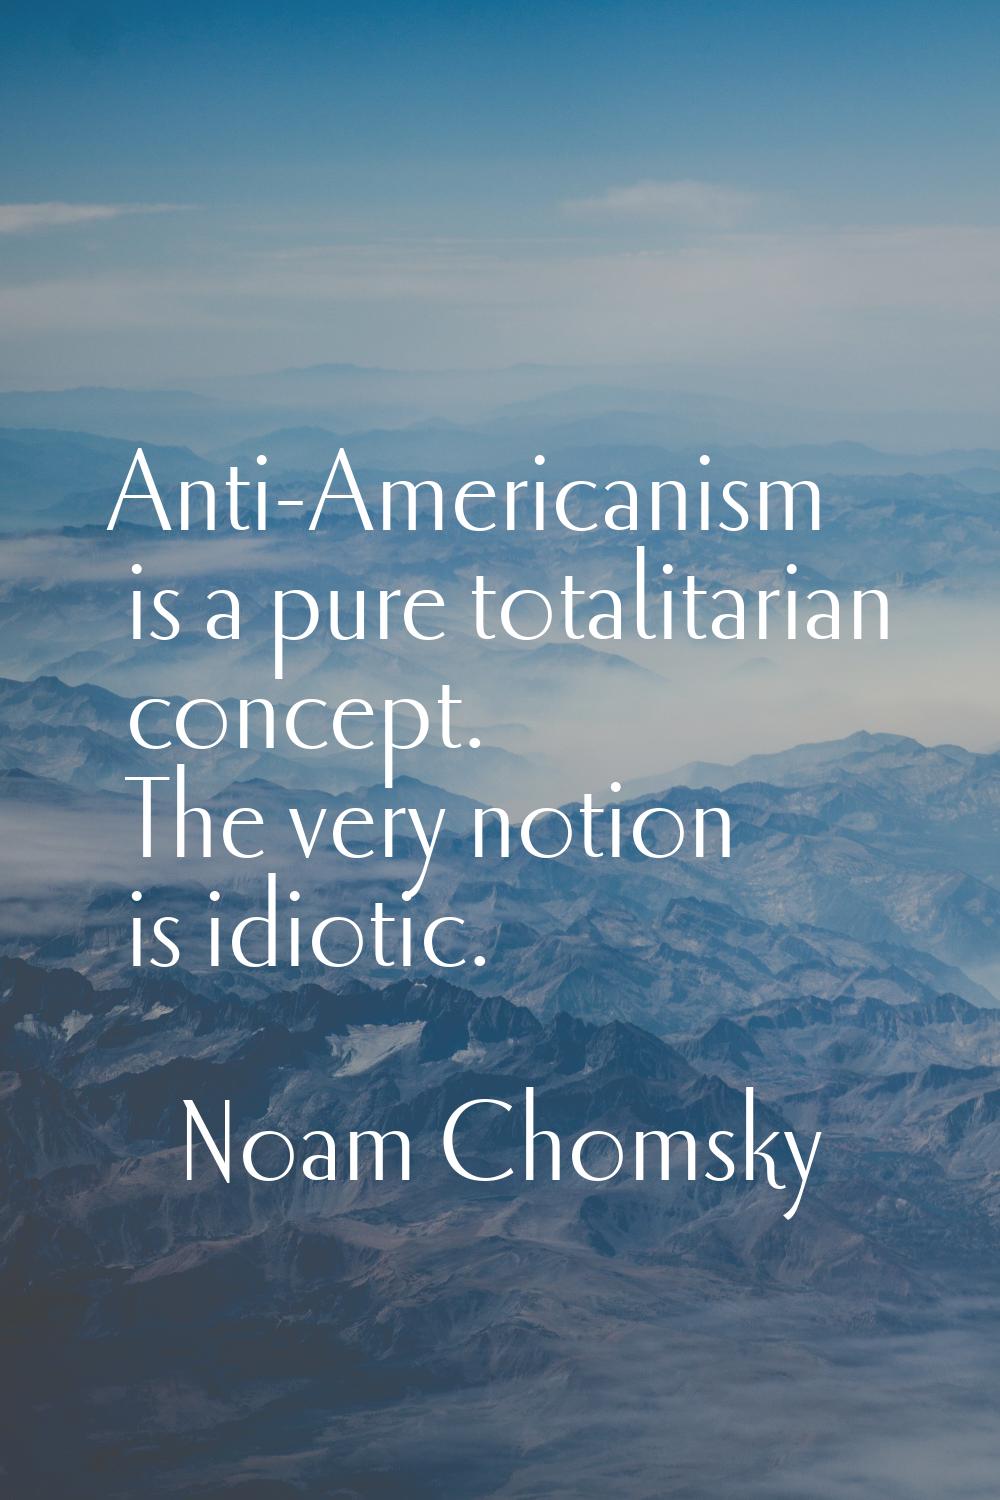 Anti-Americanism is a pure totalitarian concept. The very notion is idiotic.